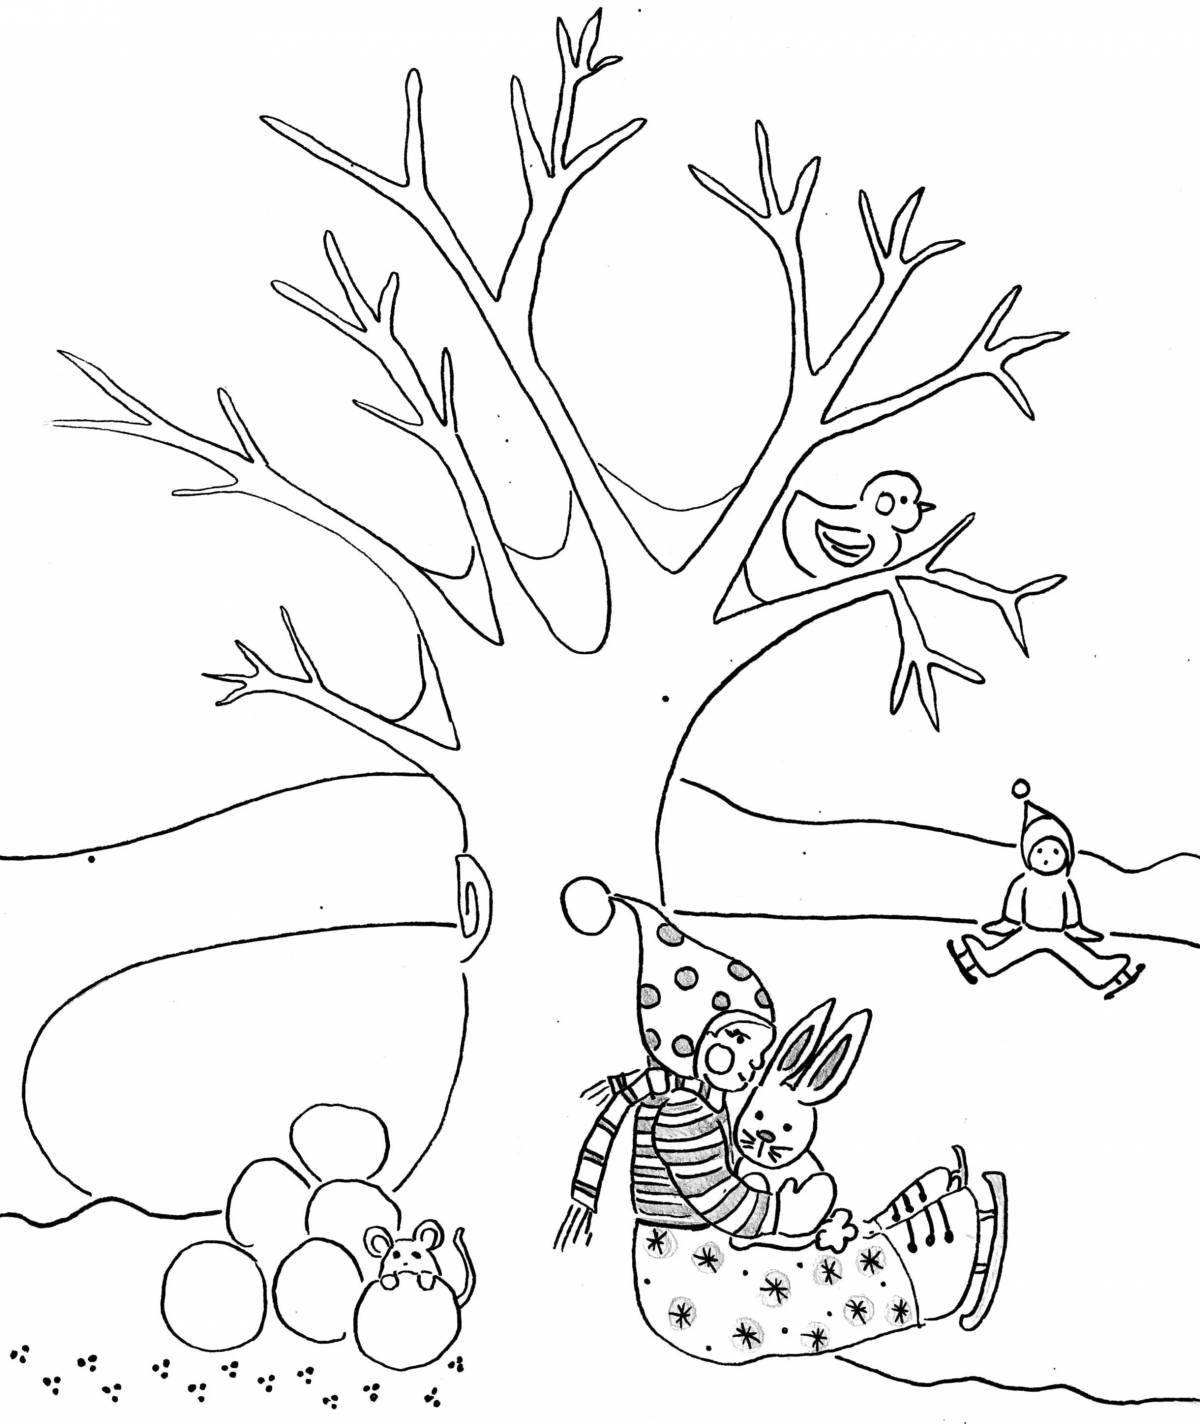 Glossy winter tree coloring book